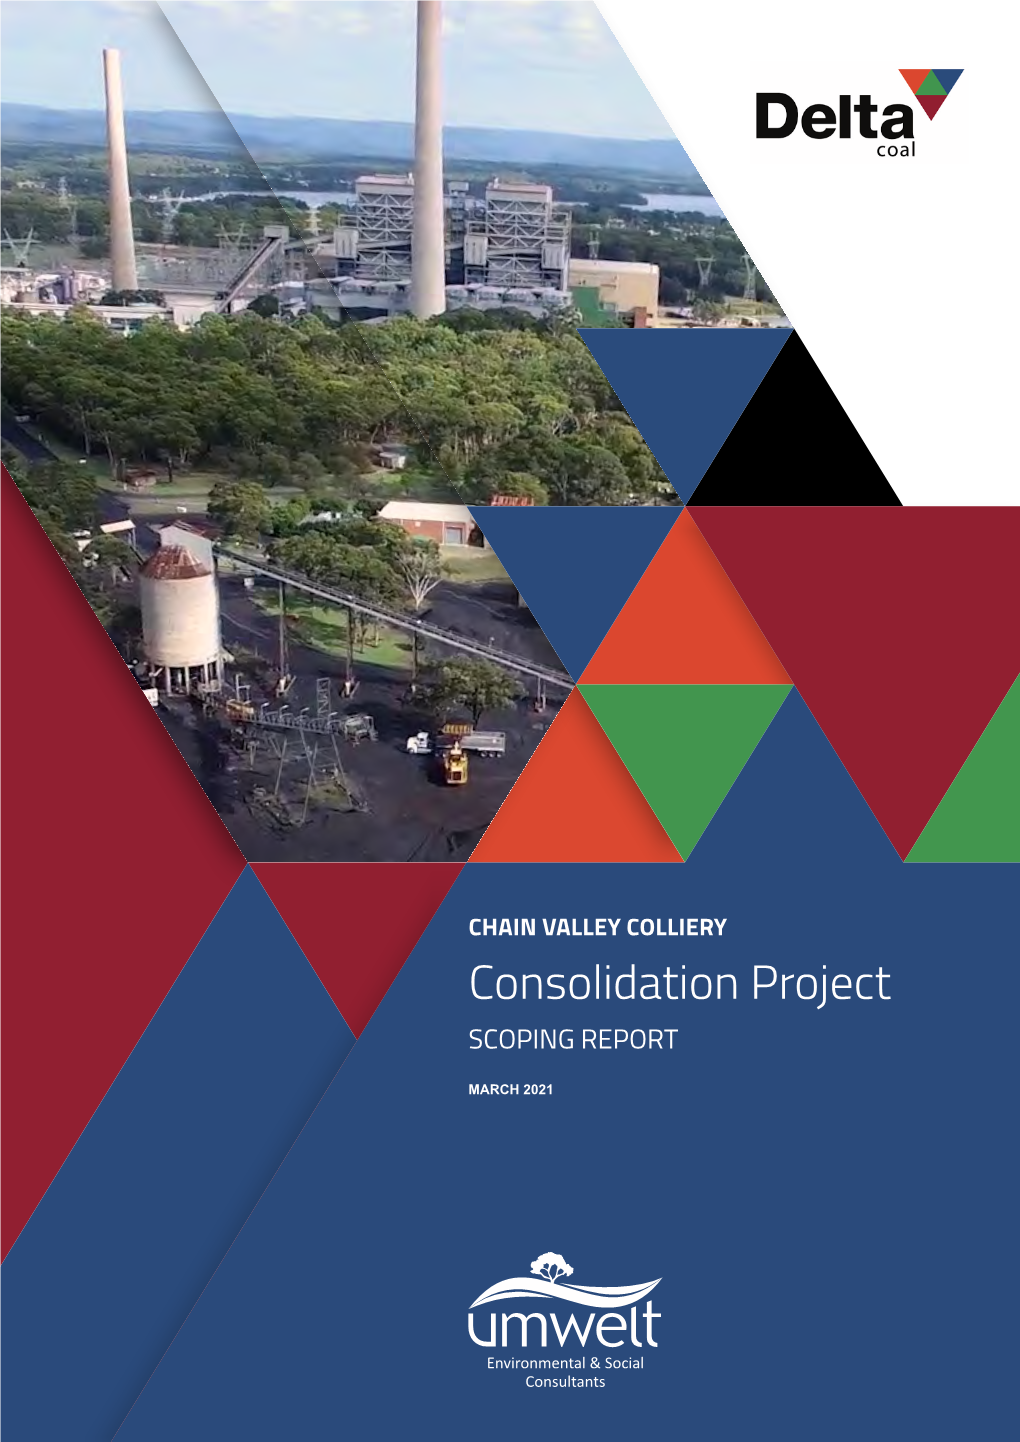 CHAIN VALLEY COLLIERY Consolidation Project SCOPING REPORT